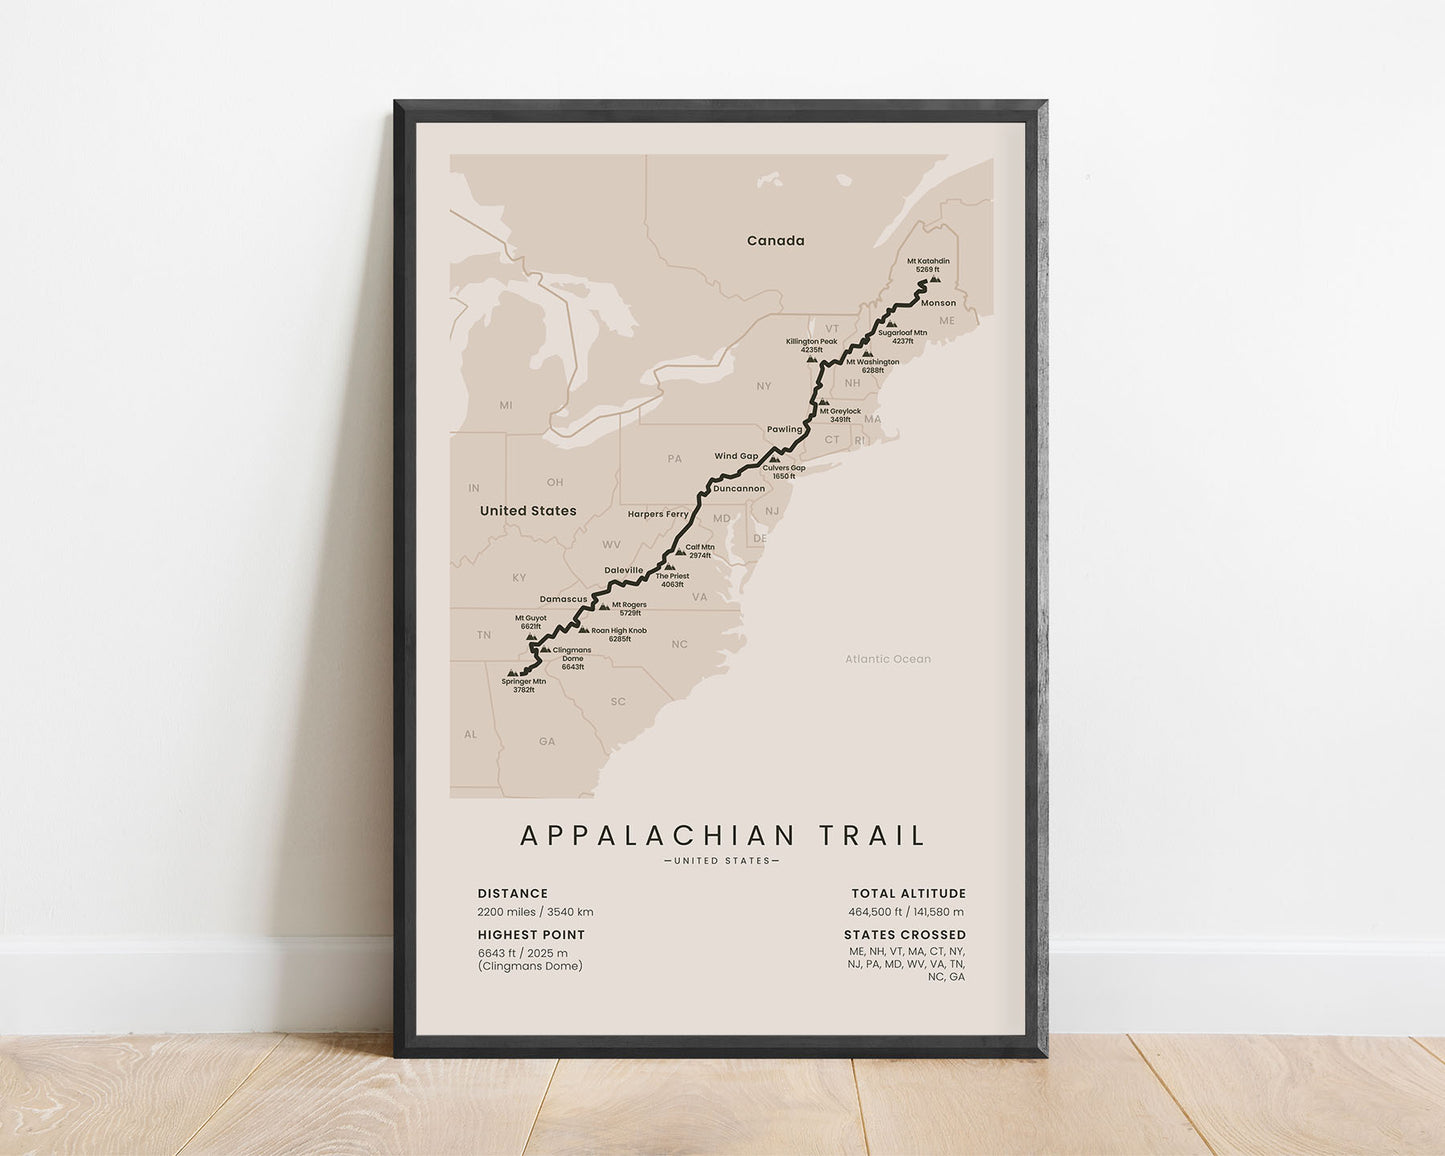 Appalachian Trail (Georgia, North Carolina, Tennessee, Virginia, West Virginia, Maryland, Pennsylvania, New Jersey, New York, Connecticut, Massachusetts, Vermont, New Hampshire, Maine) cross-country hike wall decor with beige background